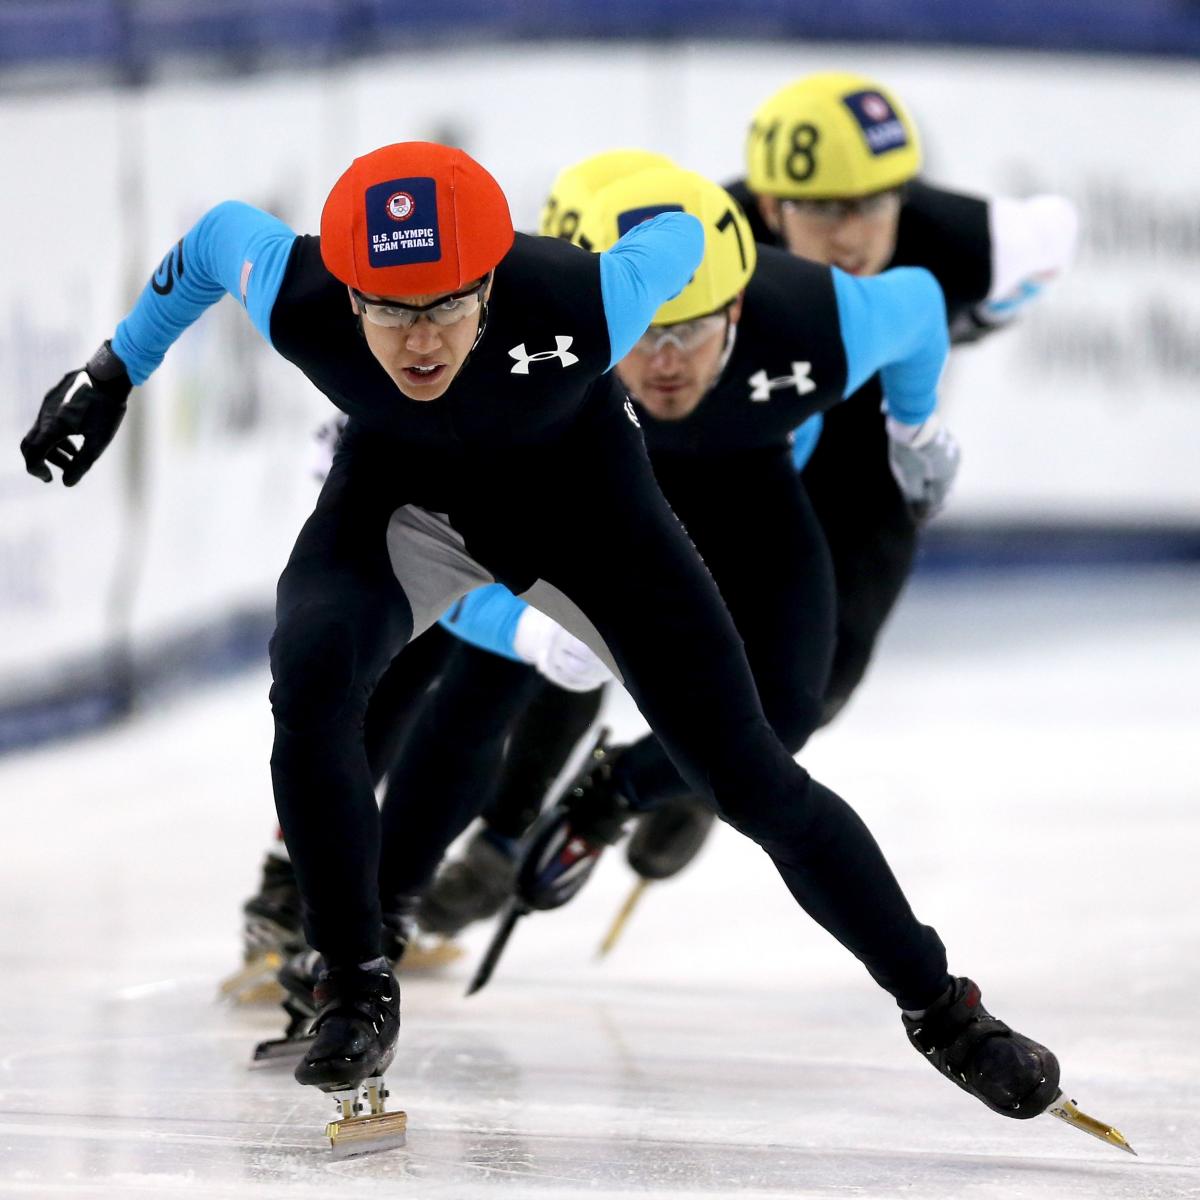 Quest for Gold: Emery Lehman - 2018 Winter Olympic speed skater